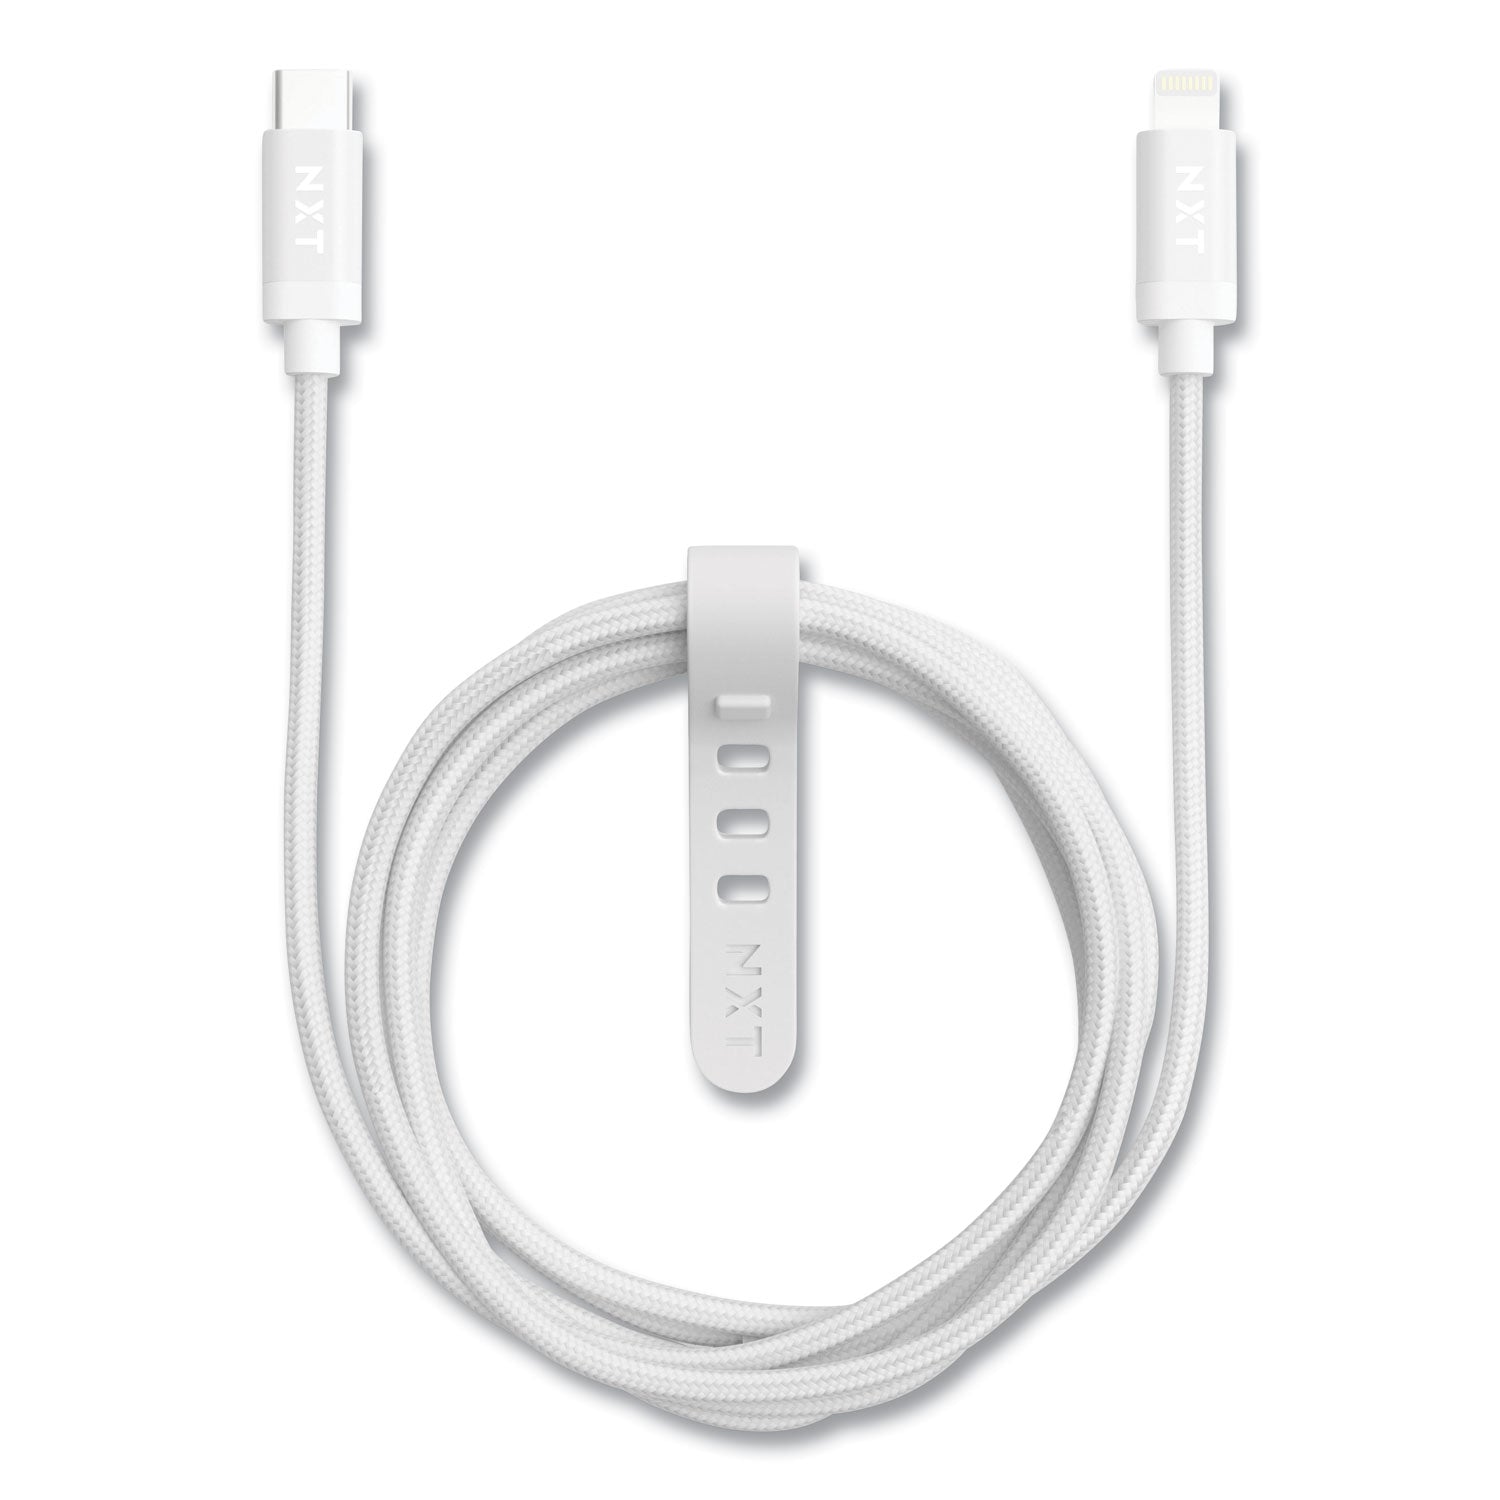 braided-apple-lightning-cable-to-usb-c-cable-6-ft-white_nxt24411020 - 2